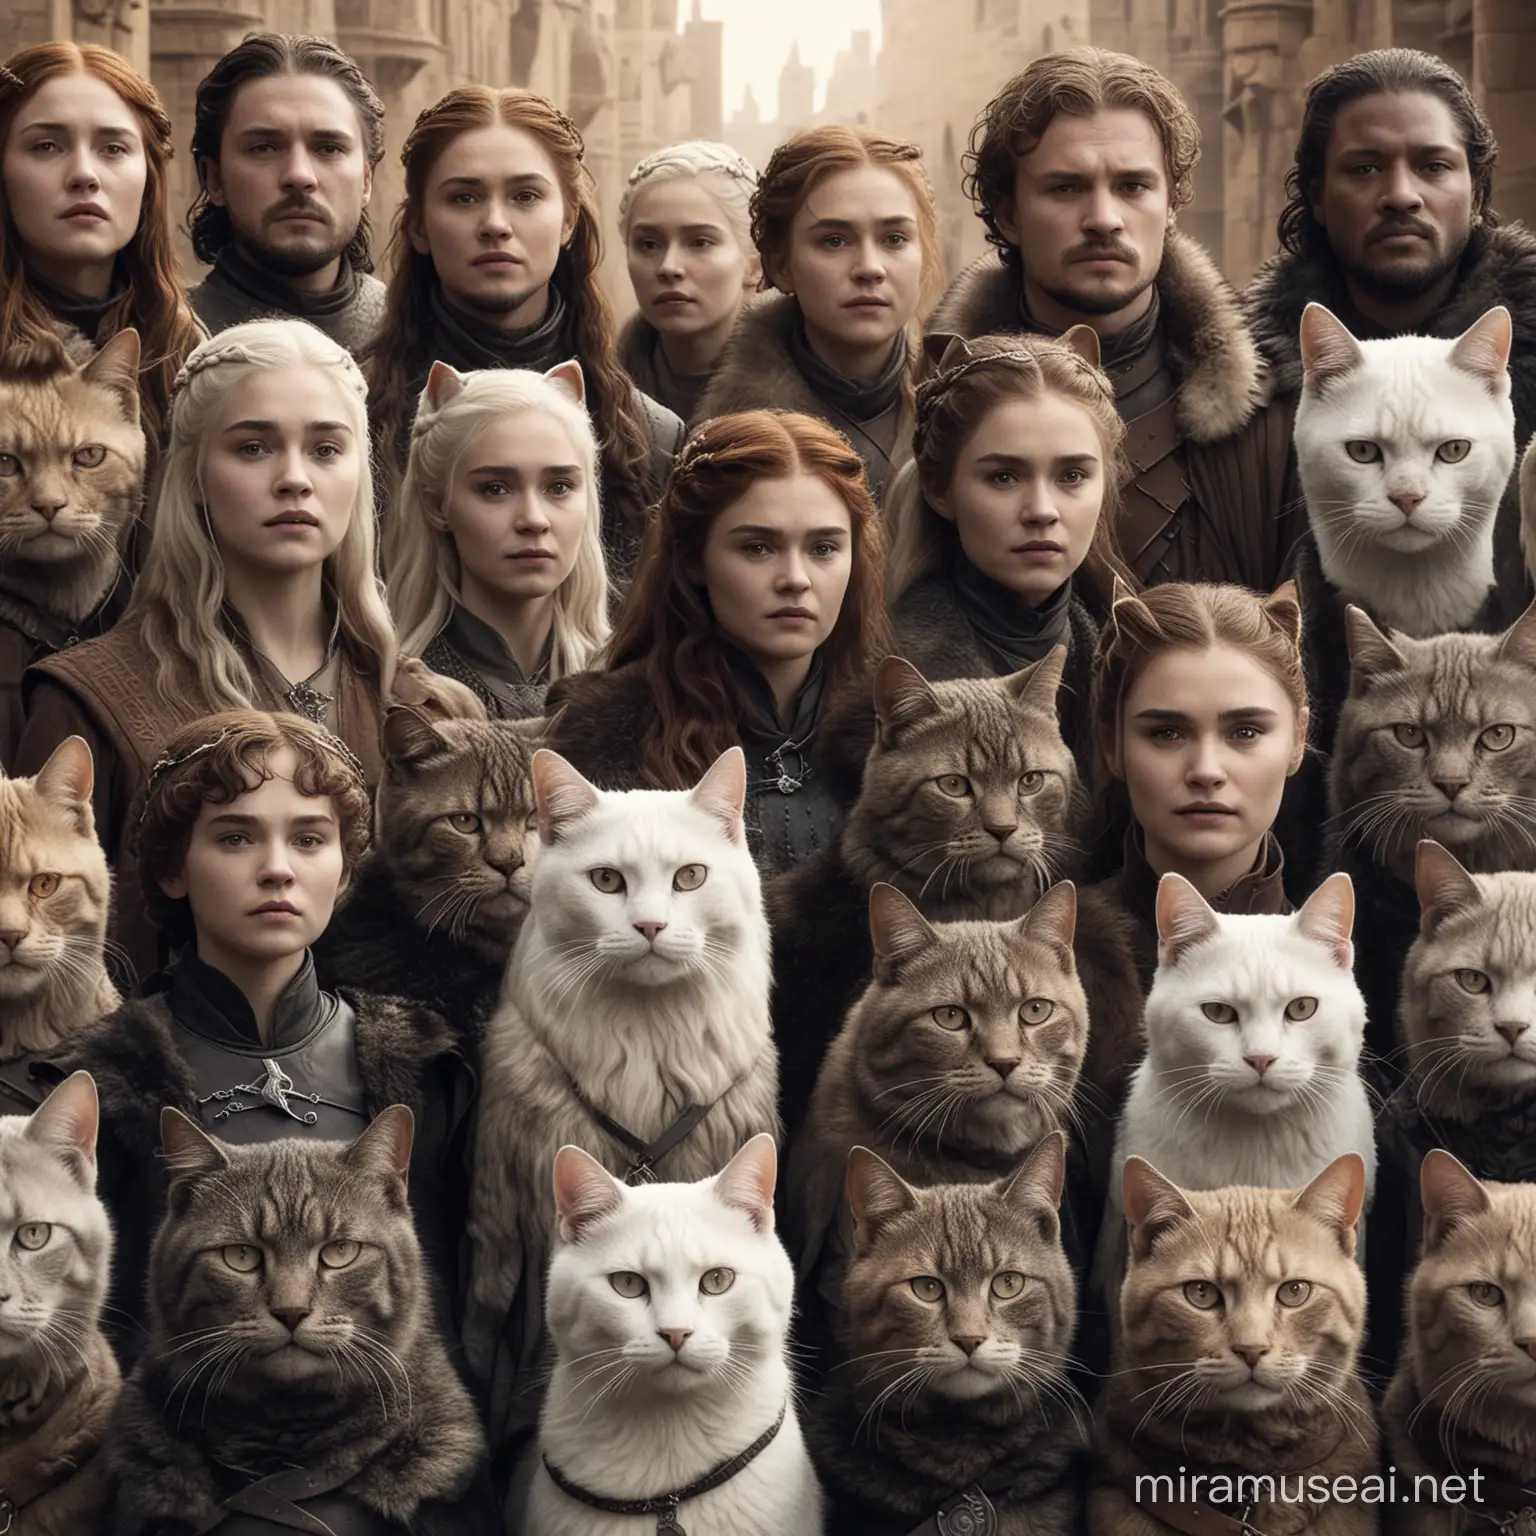 Humans with Cat Faces in Game of Thrones Scene